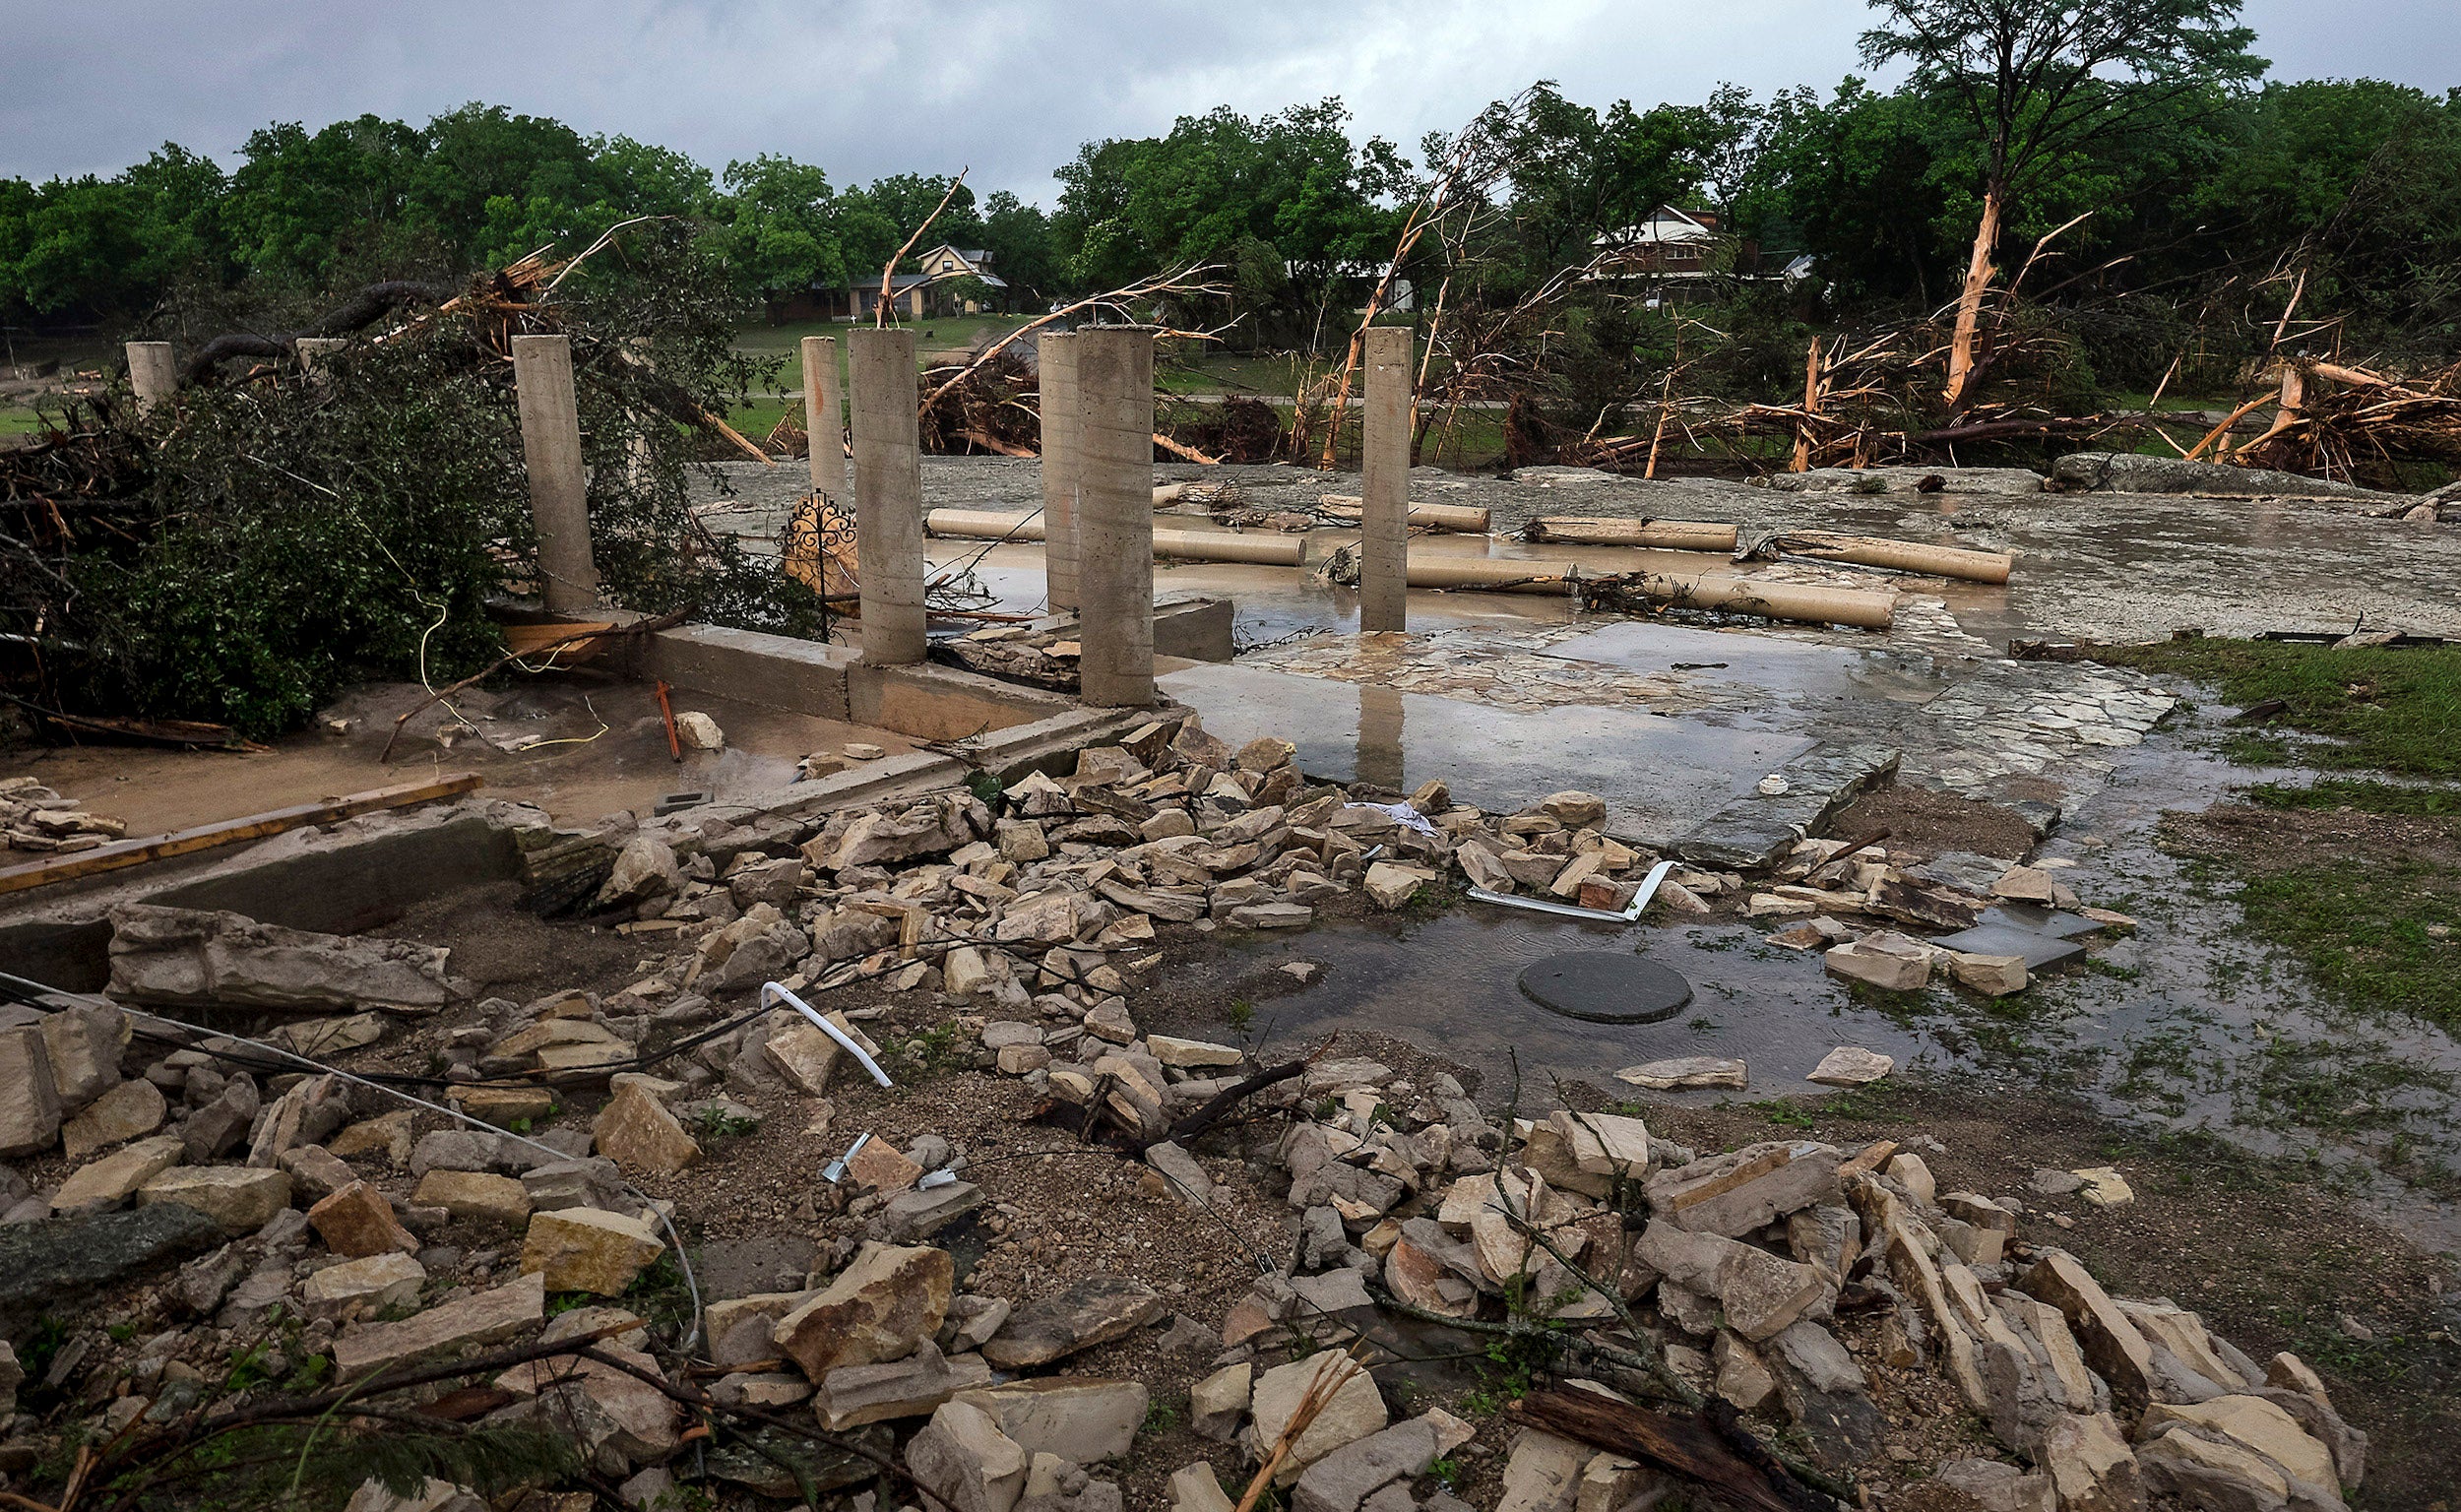 12 people connected to two families are missing after their holiday home in Wimberley swept away